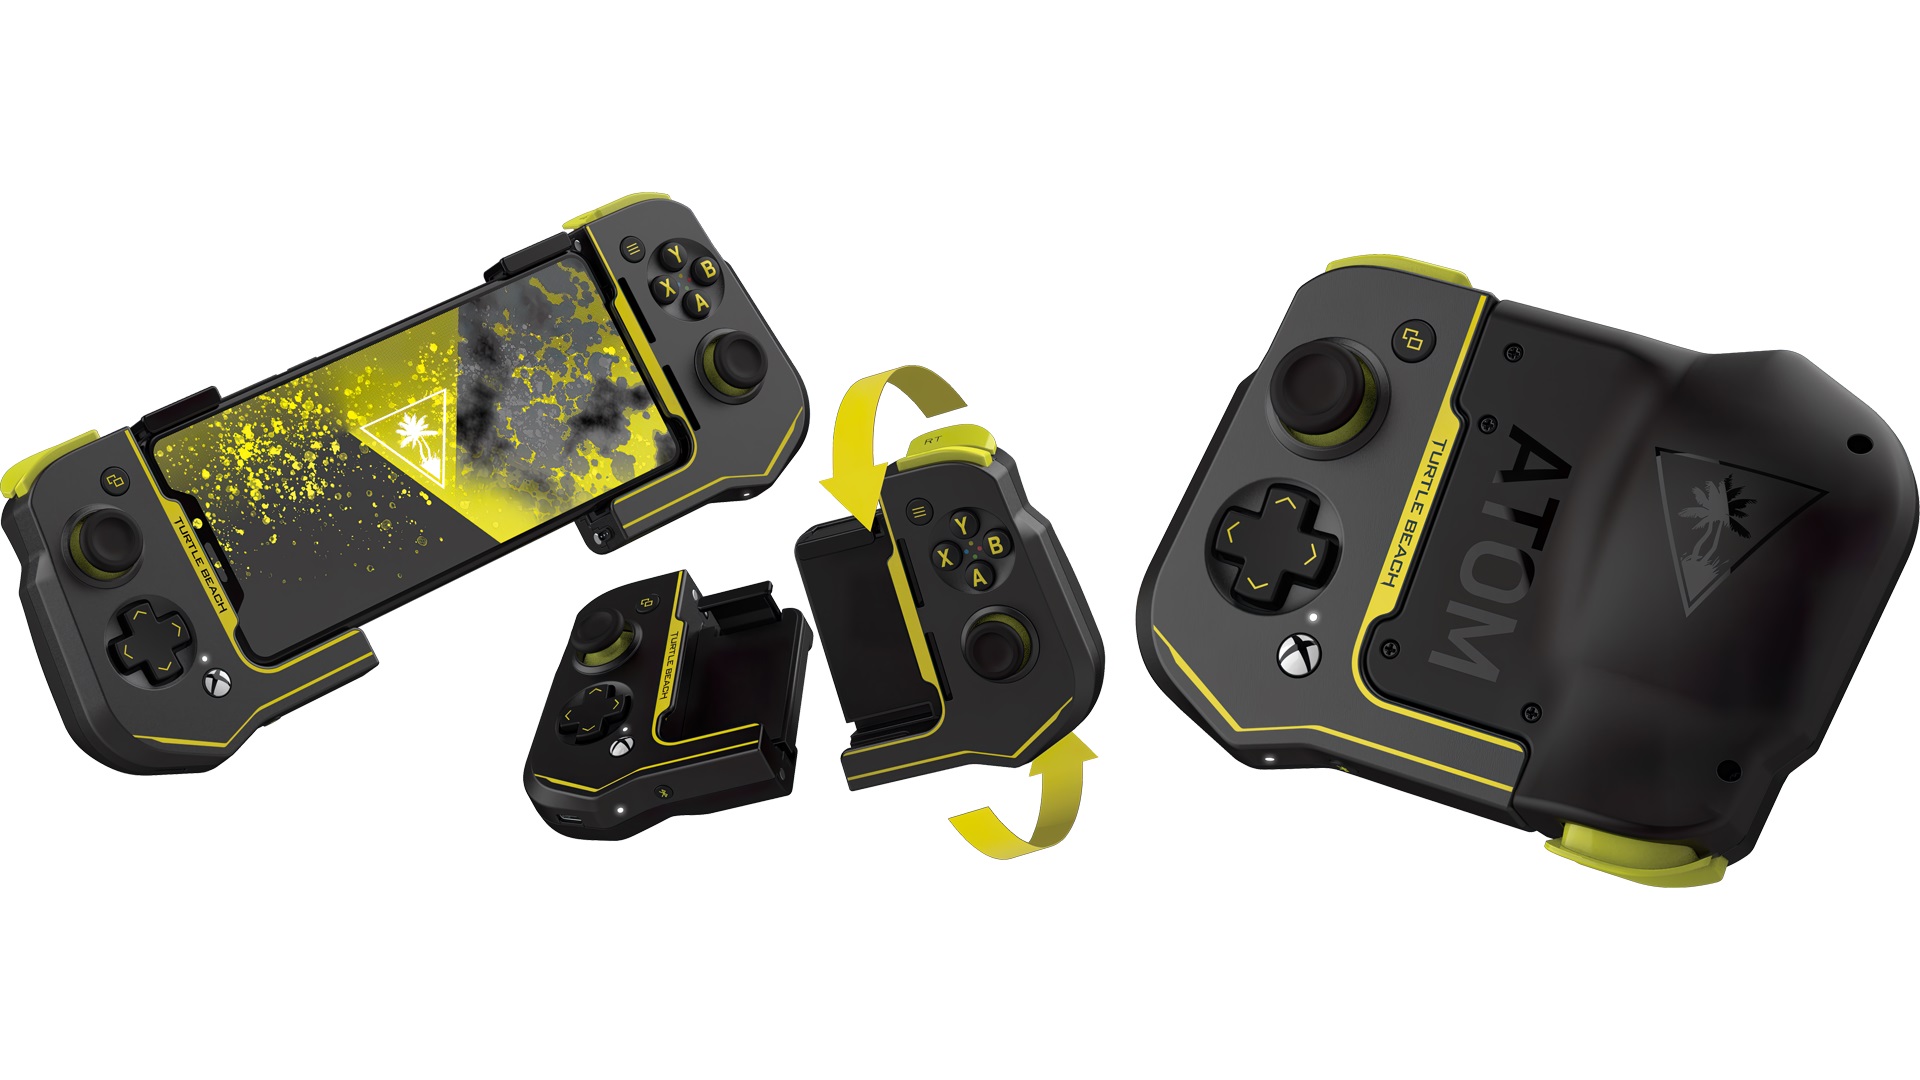 Neue Designed for Xbox Accessoires: So wird mobiles Gaming noch besser